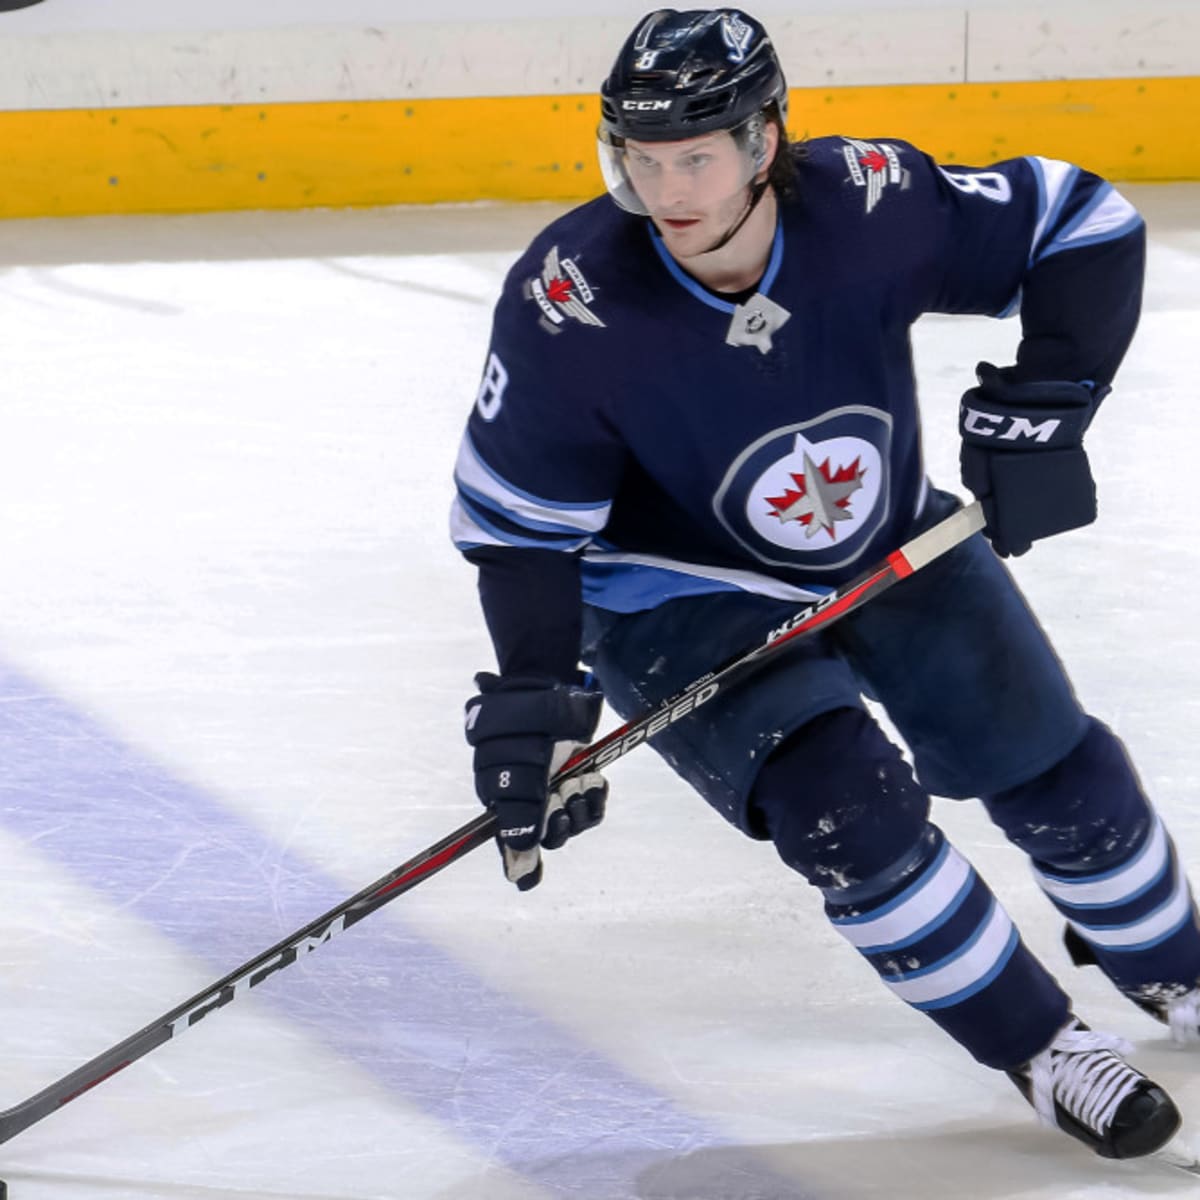 Rangers acquire Trouba from Jets for Pionk, 1st round pick